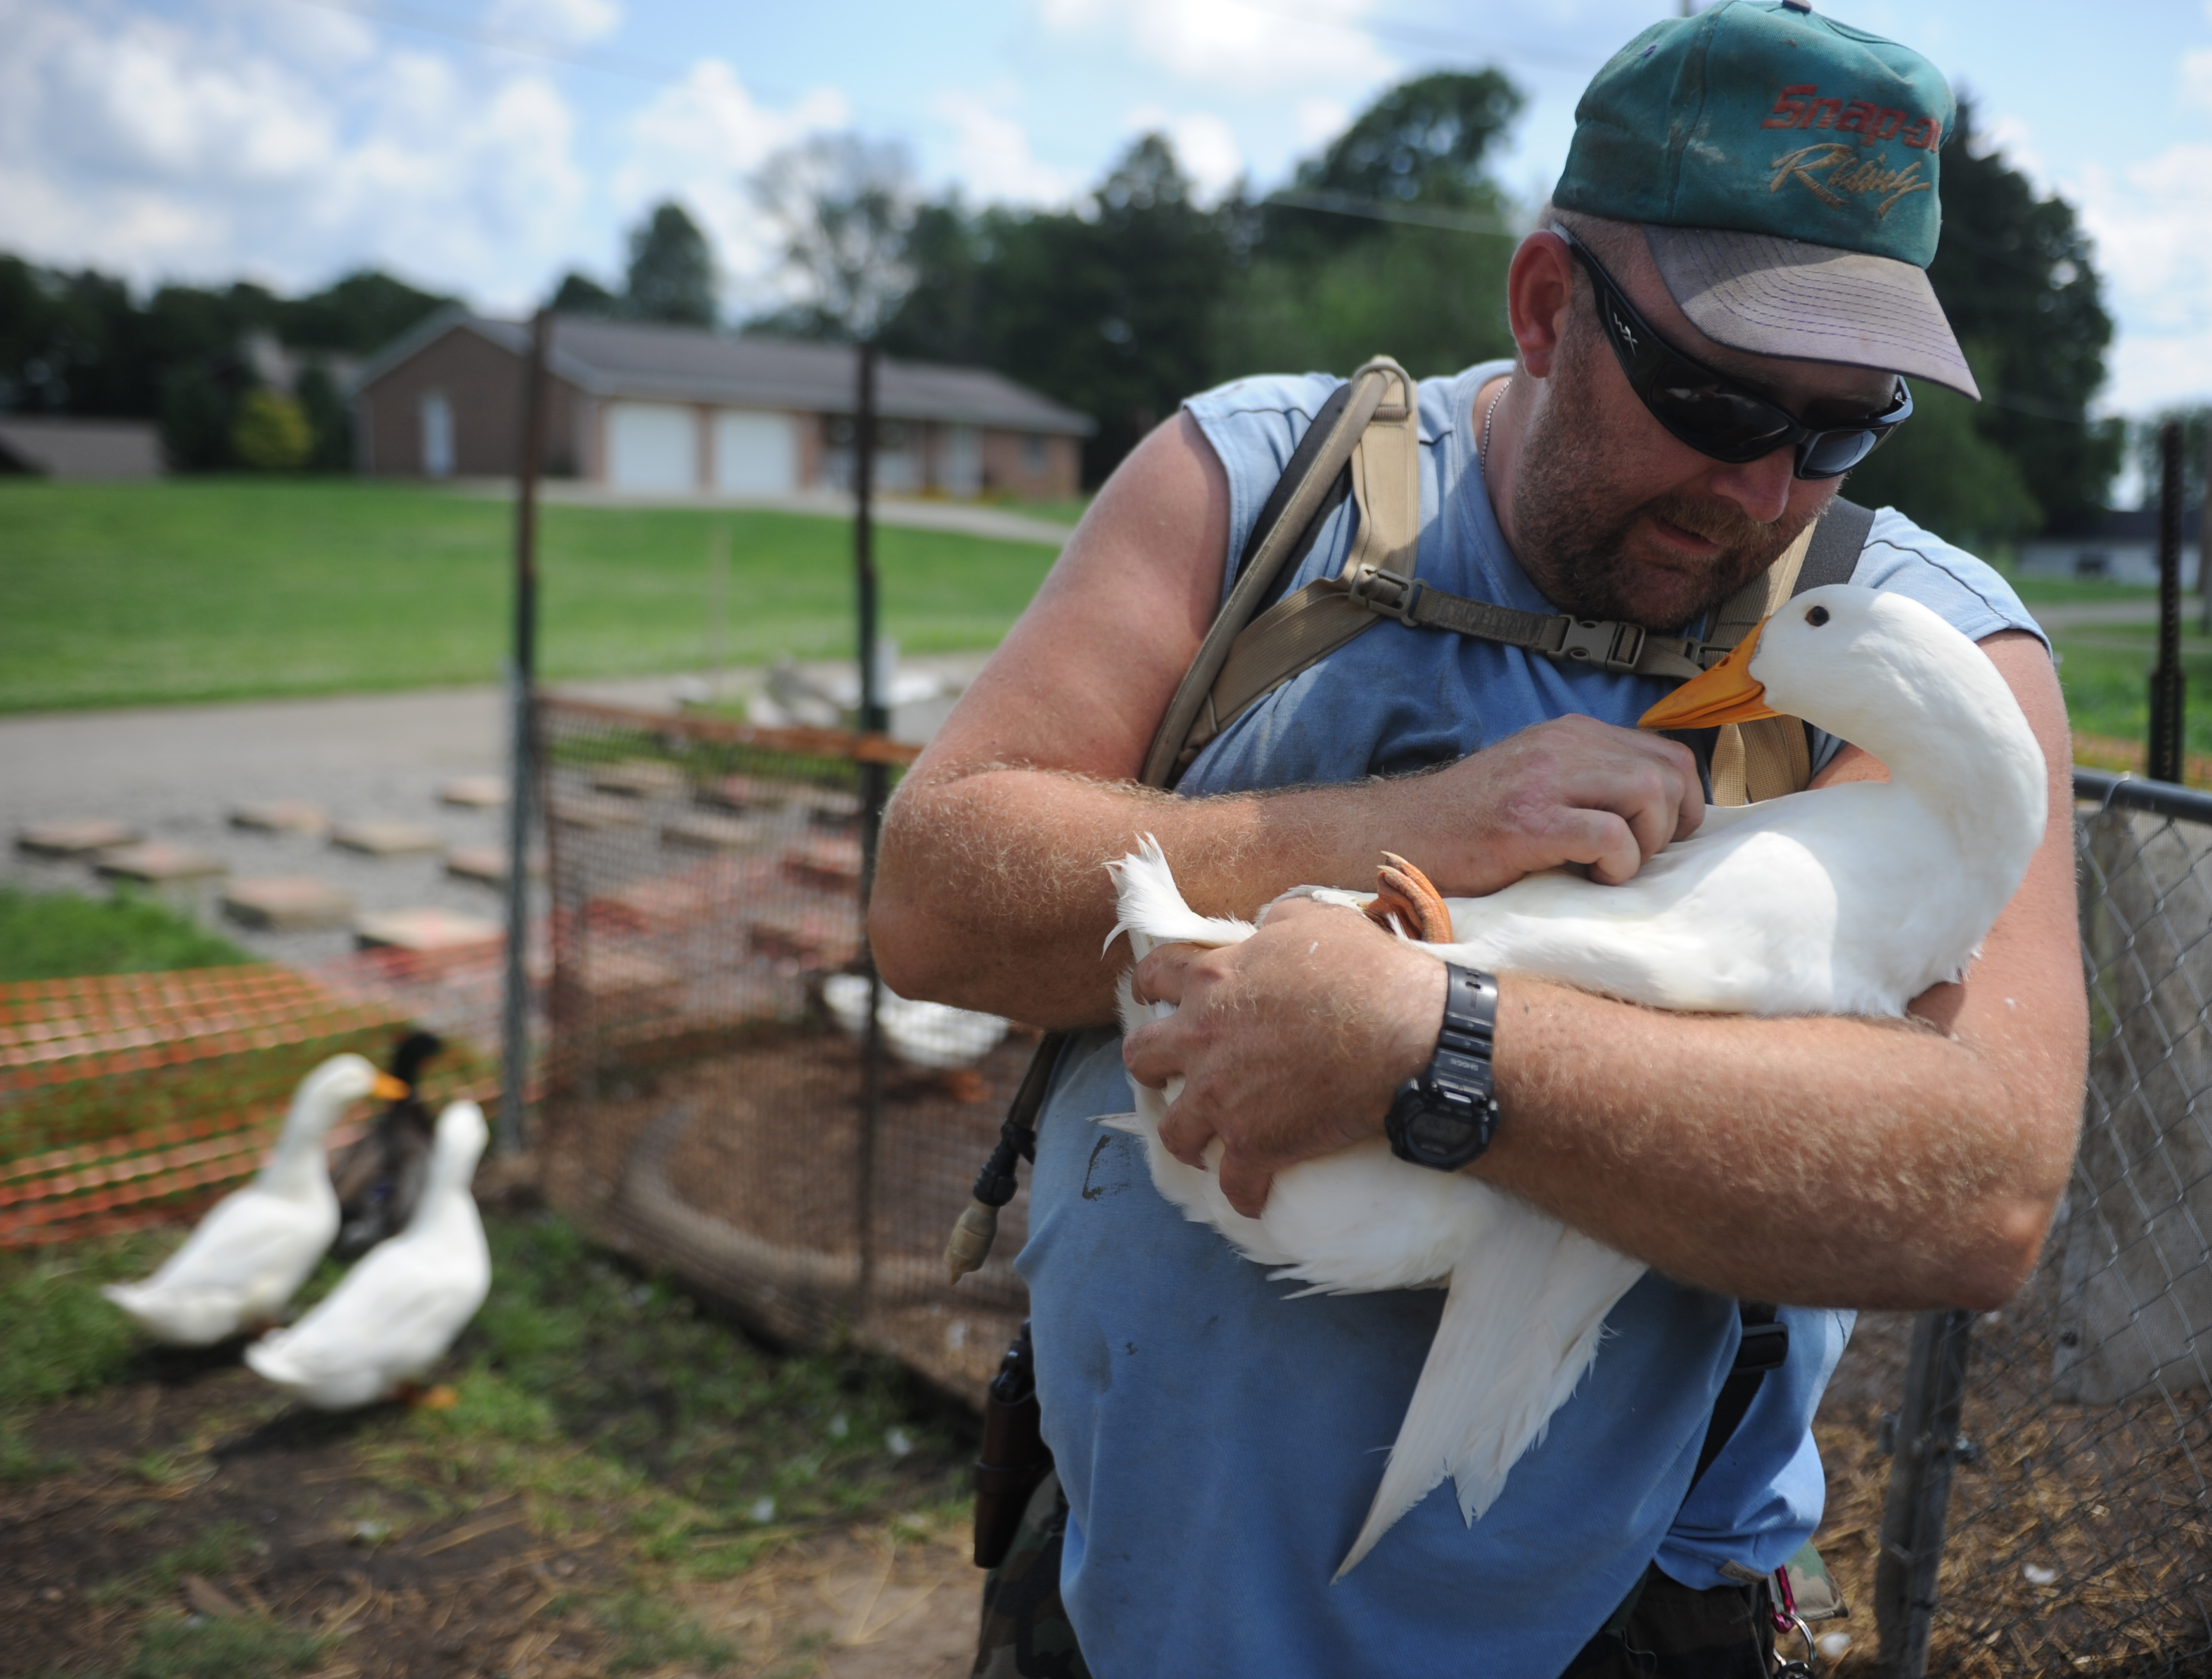 Iraq war veteran Darin Welker holds one of his ducks at his home in West Lafayette, Ohio on July 10, 2014.